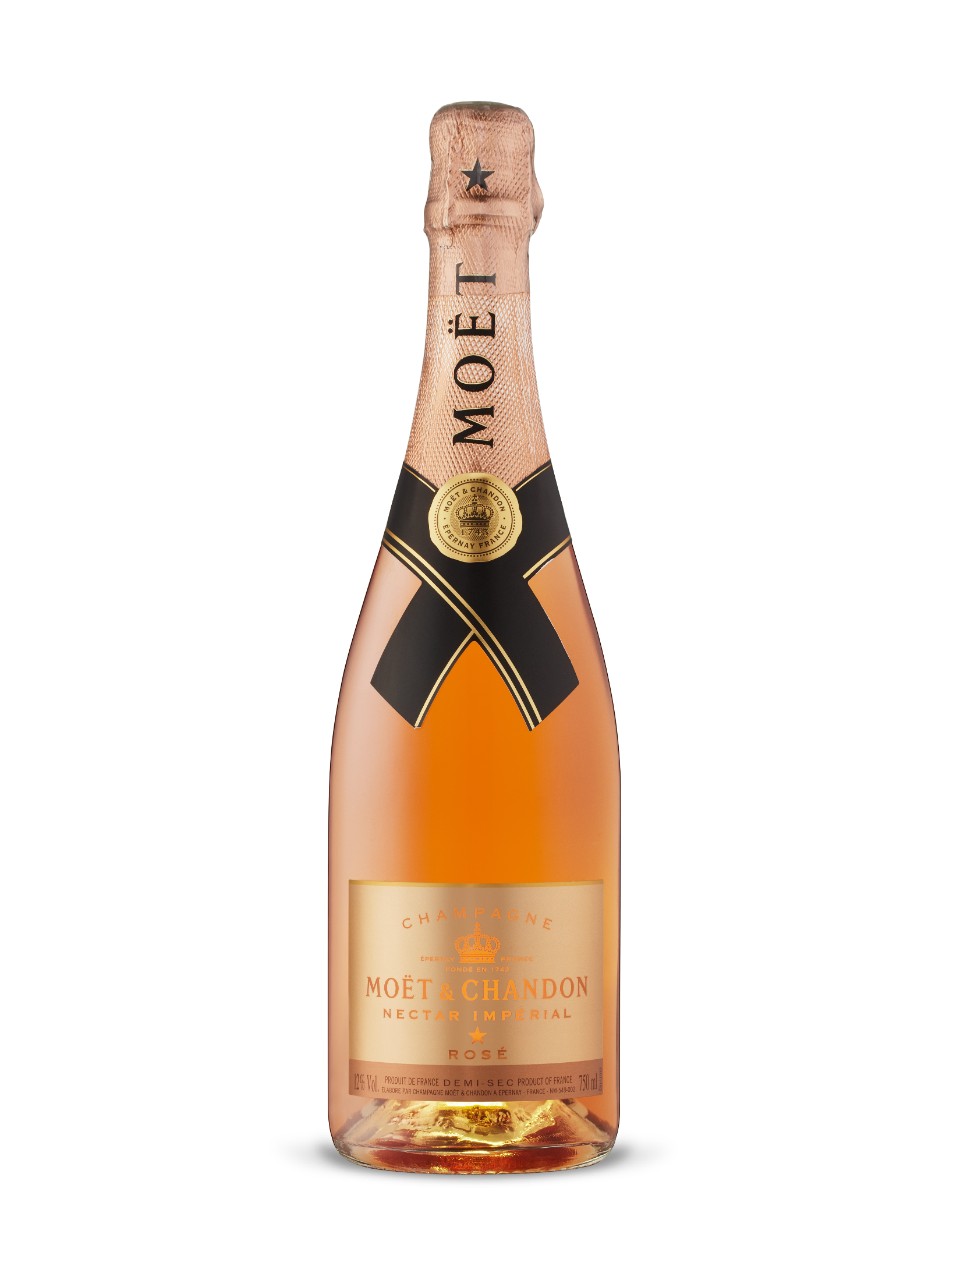 Moet-_-Chandon-Nectar-Imperial-Rose